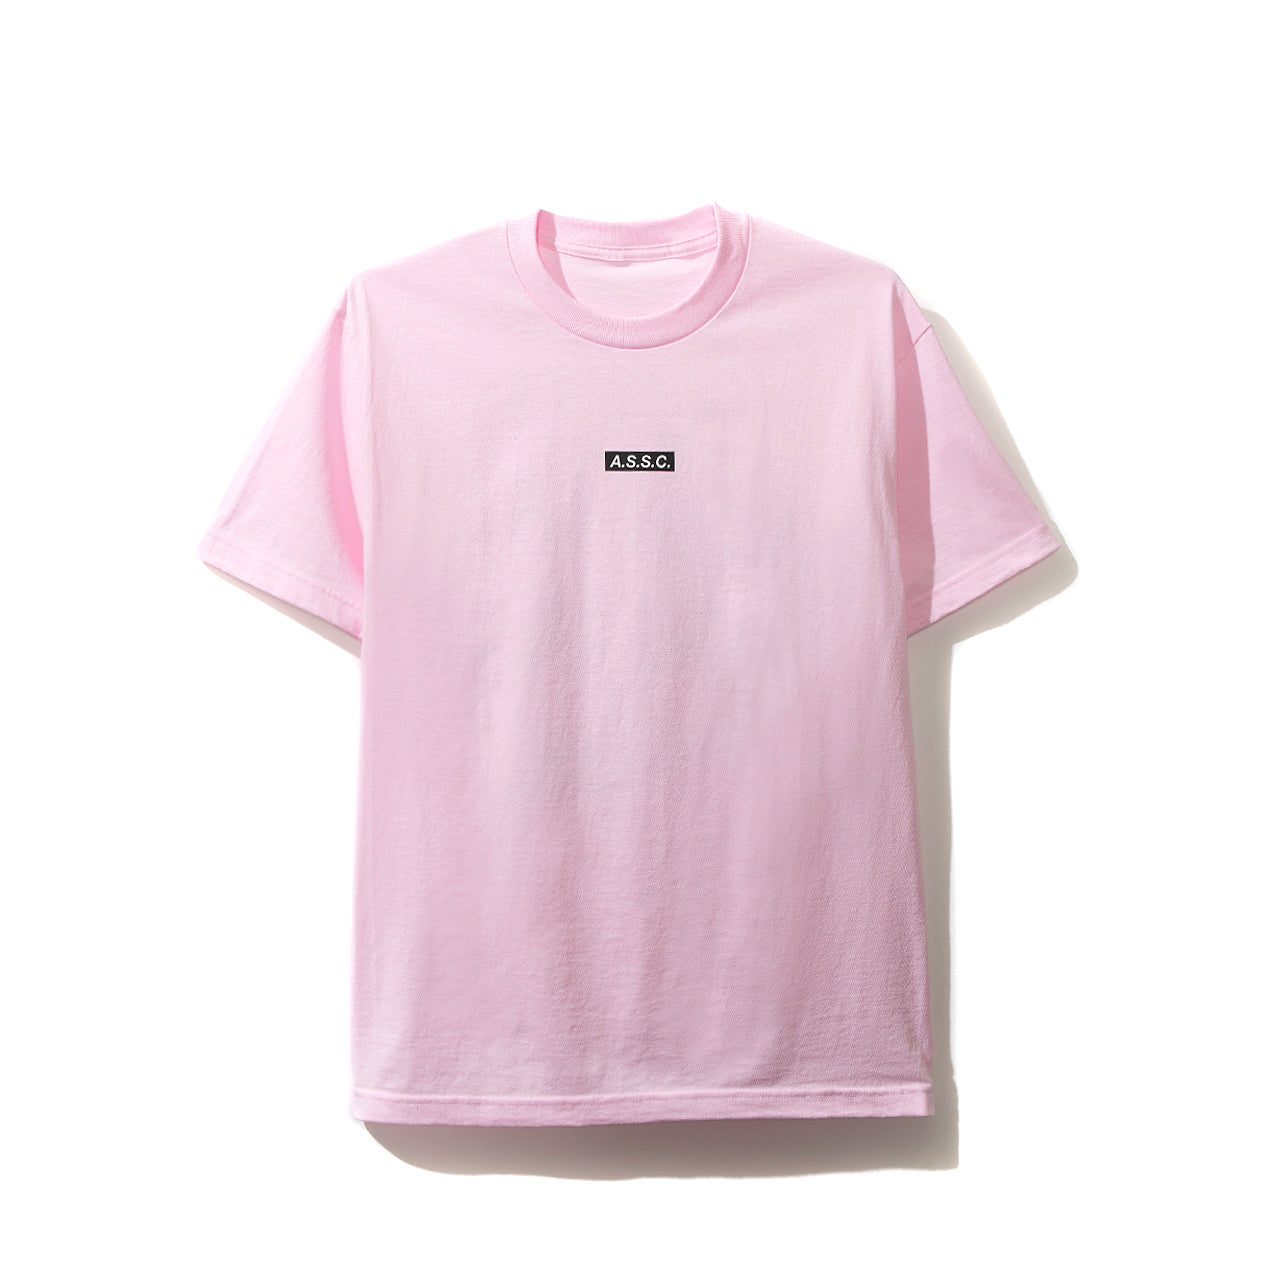 What Sup Pink Tee